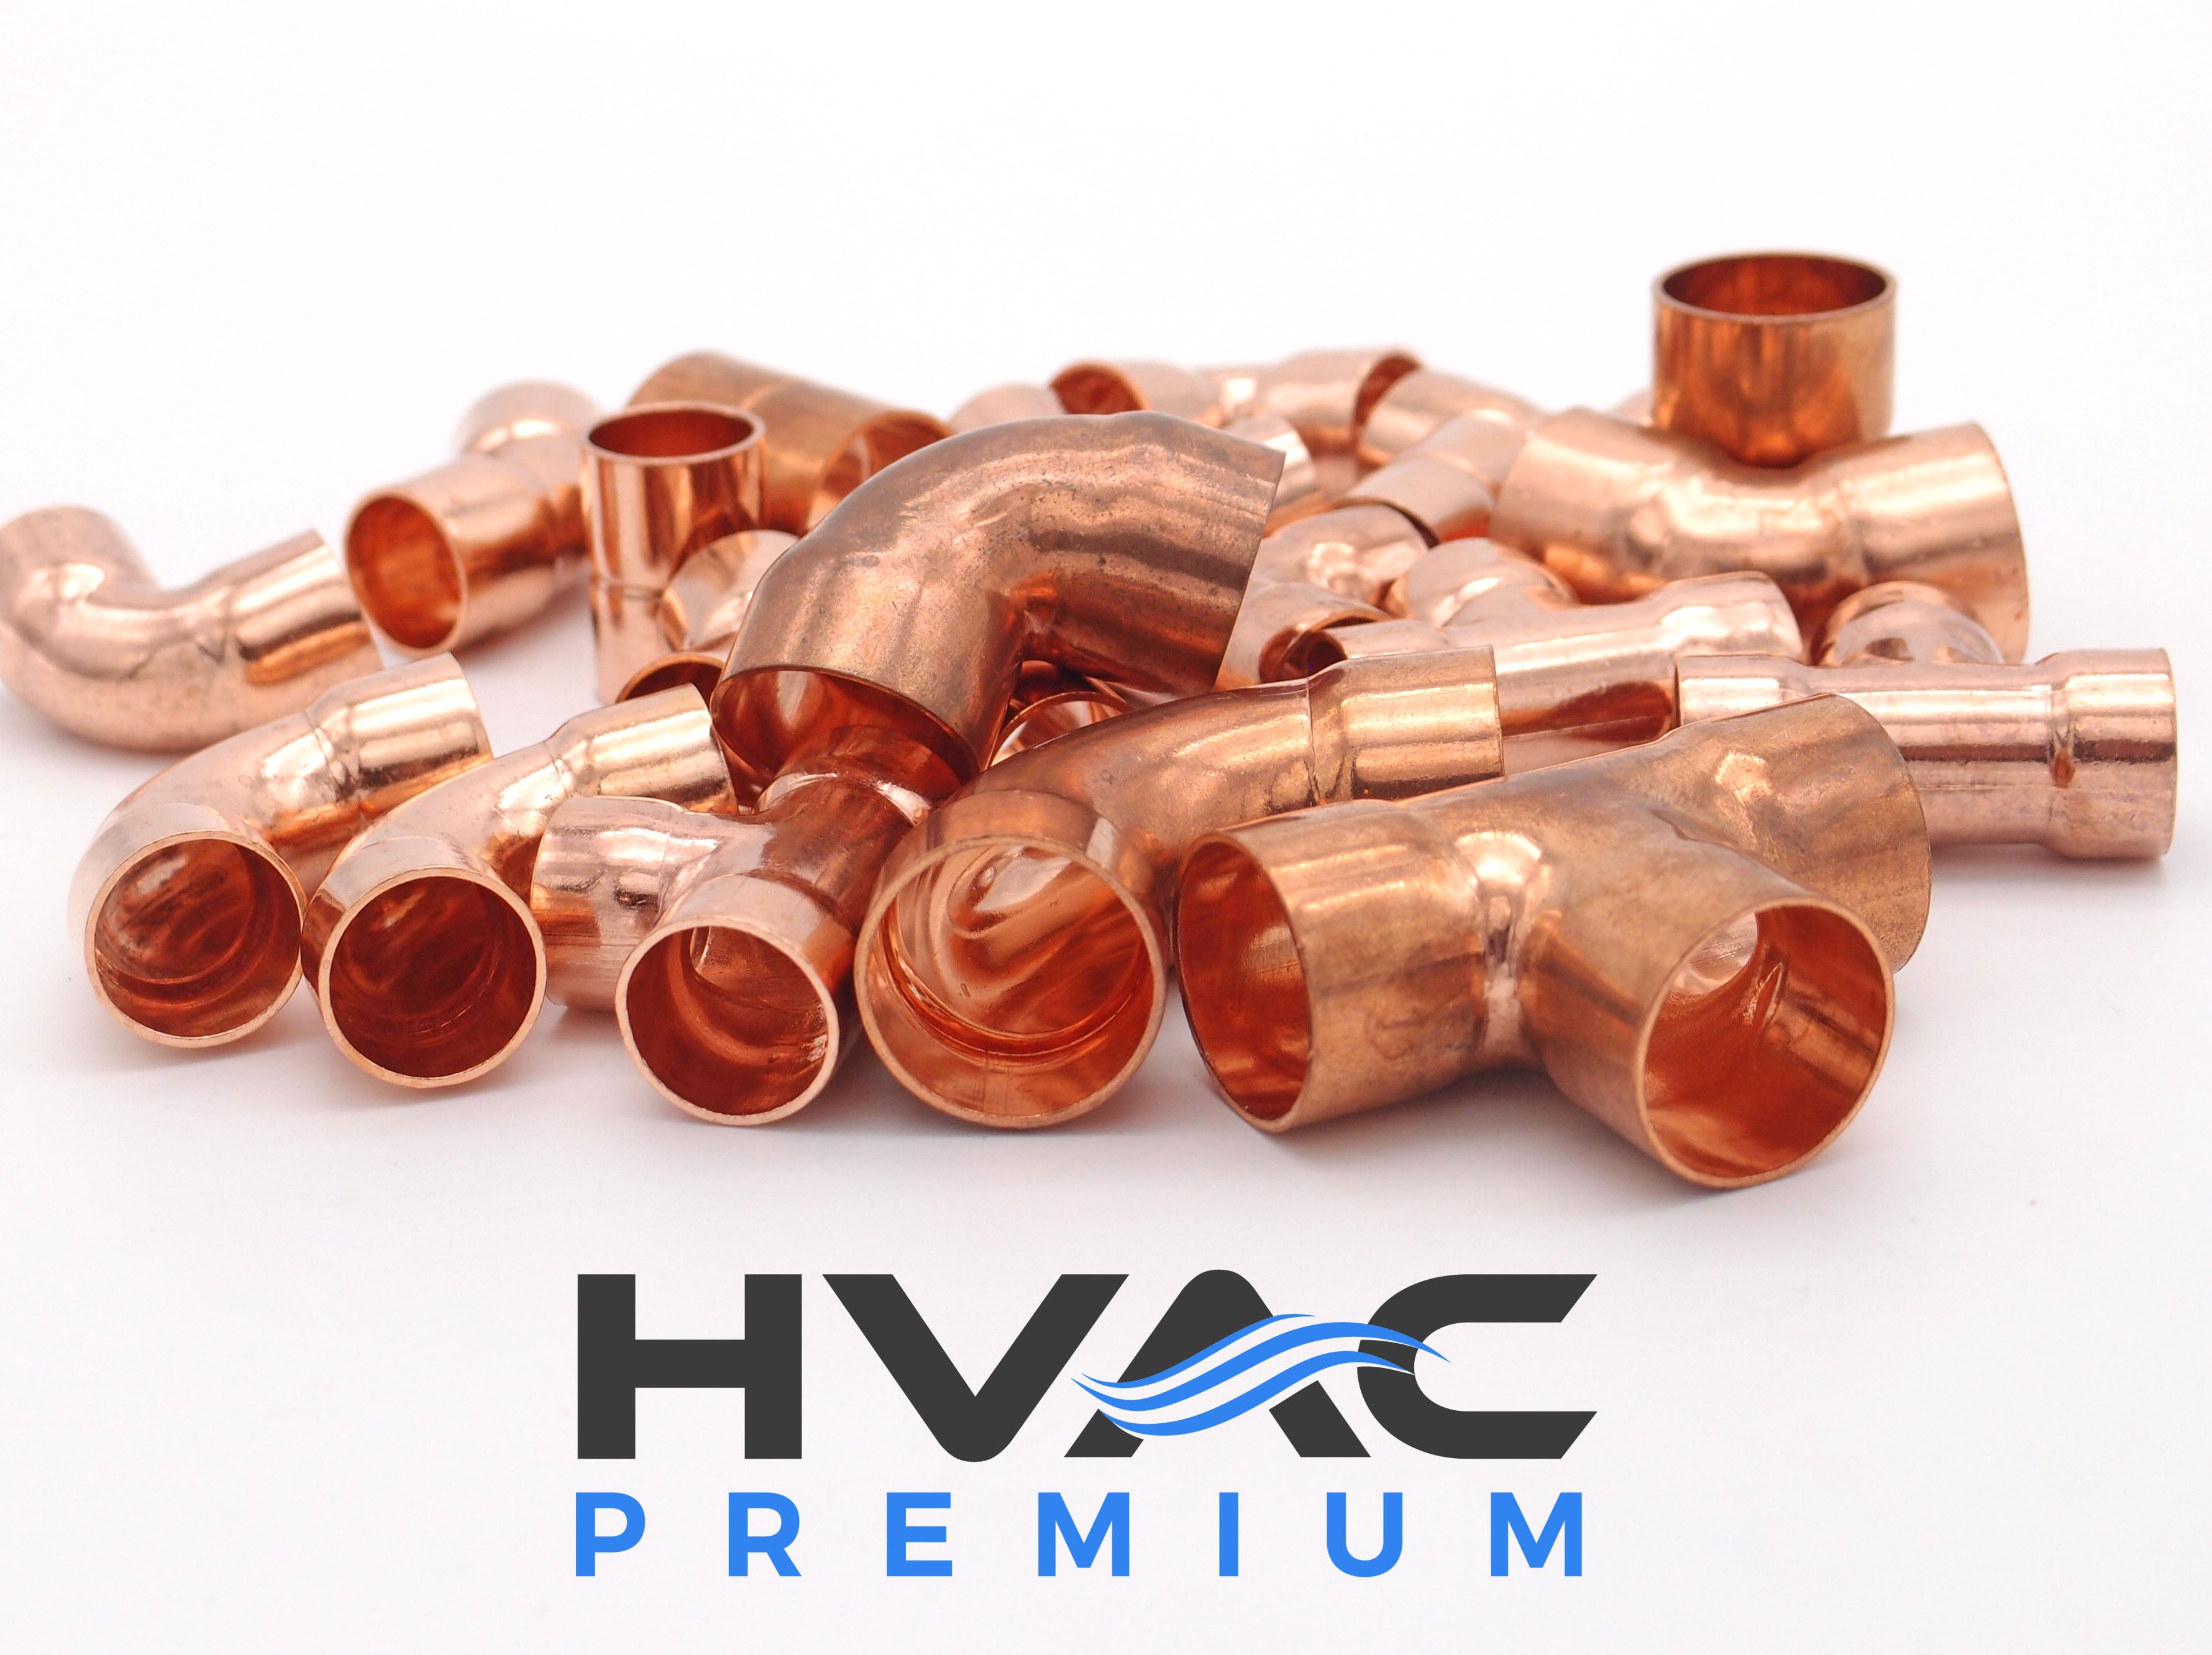 Copper Fitting 3/4 to 5/8 (HVAC Dimensions) Reducer / Increaser Copper Coupling & HVAC – 5/8 to 1/2 (Plumbing Inner Dimensions) 99.9% Pure Copper - 5 Pack